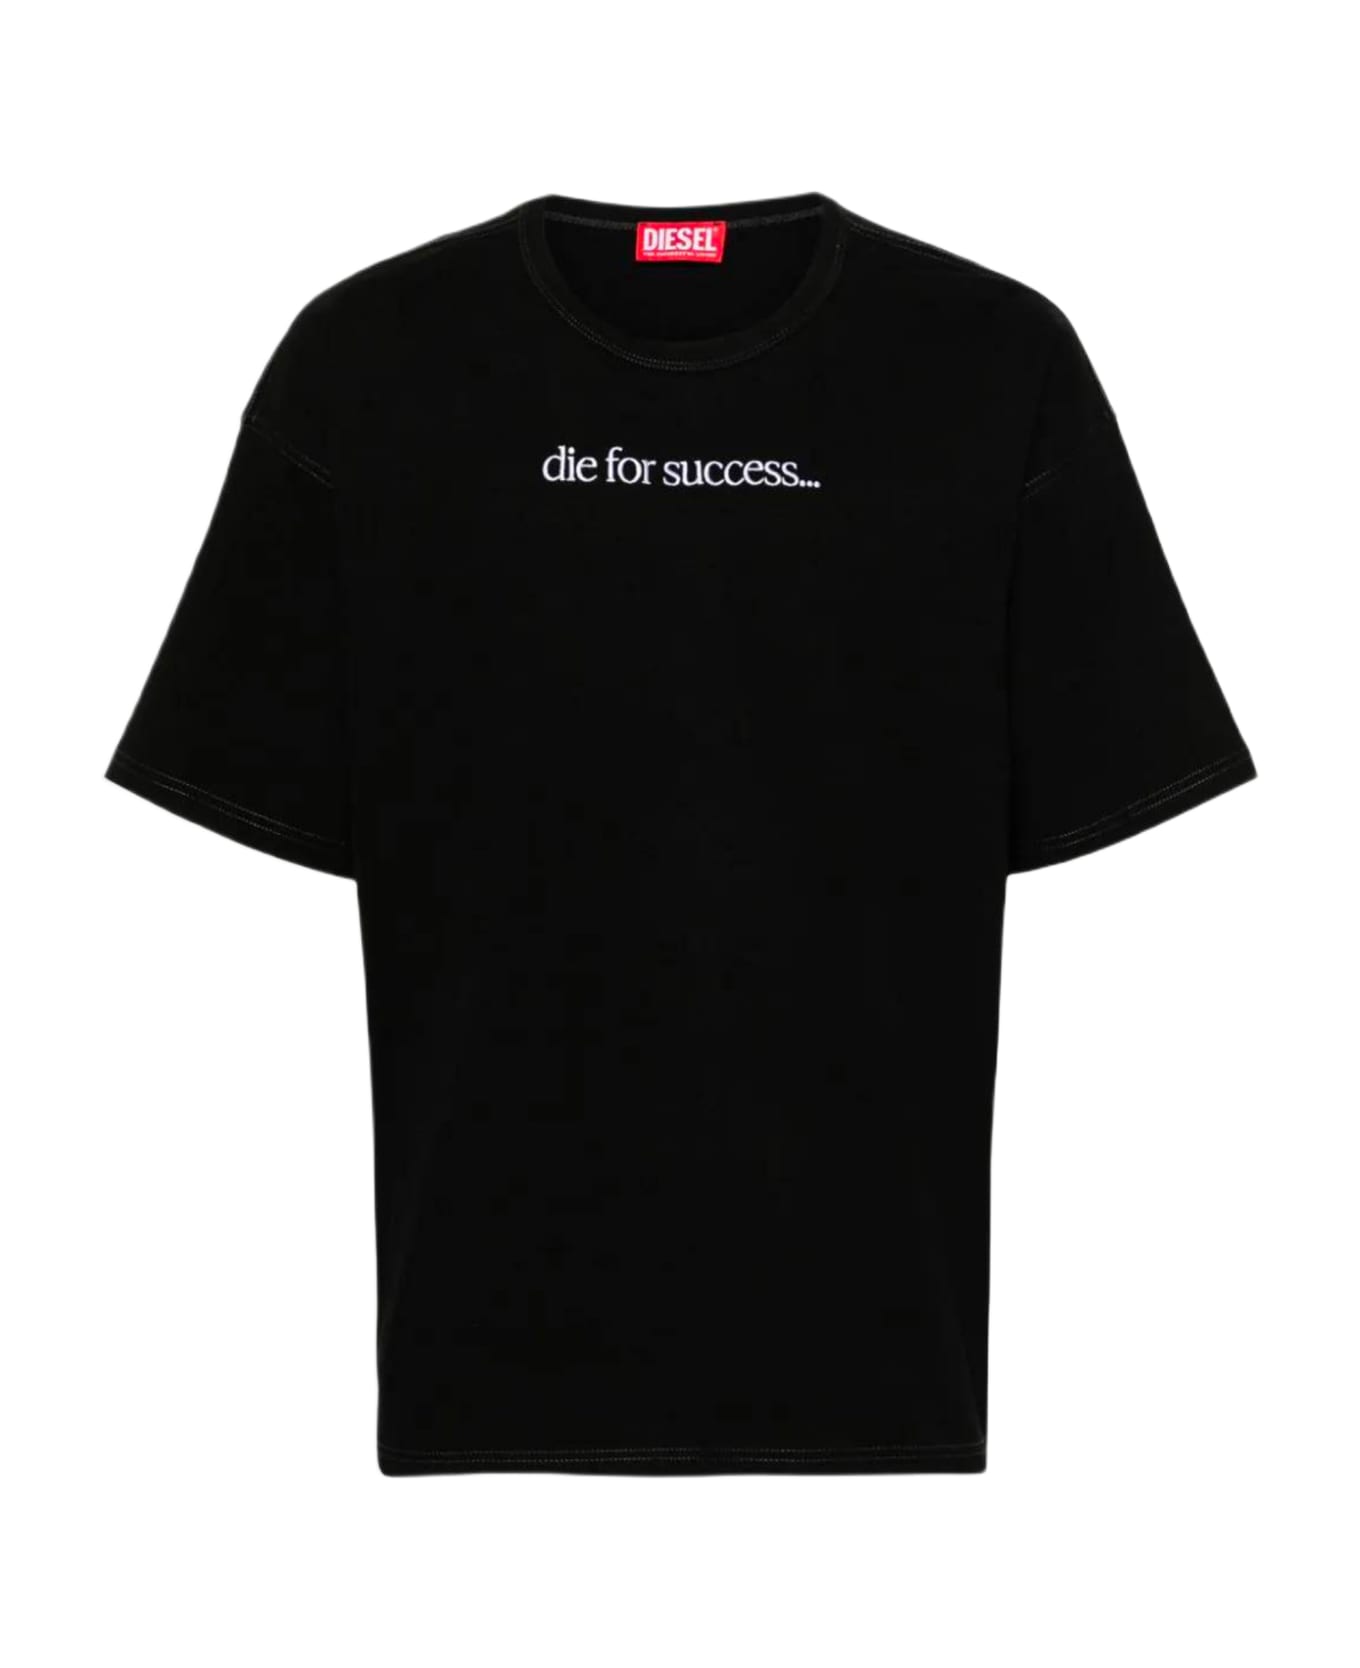 Diesel 0nfae T-box-n6 Black cotton t-shirt with front slogan embroidery - T Boxt N6 - Nero シャツ